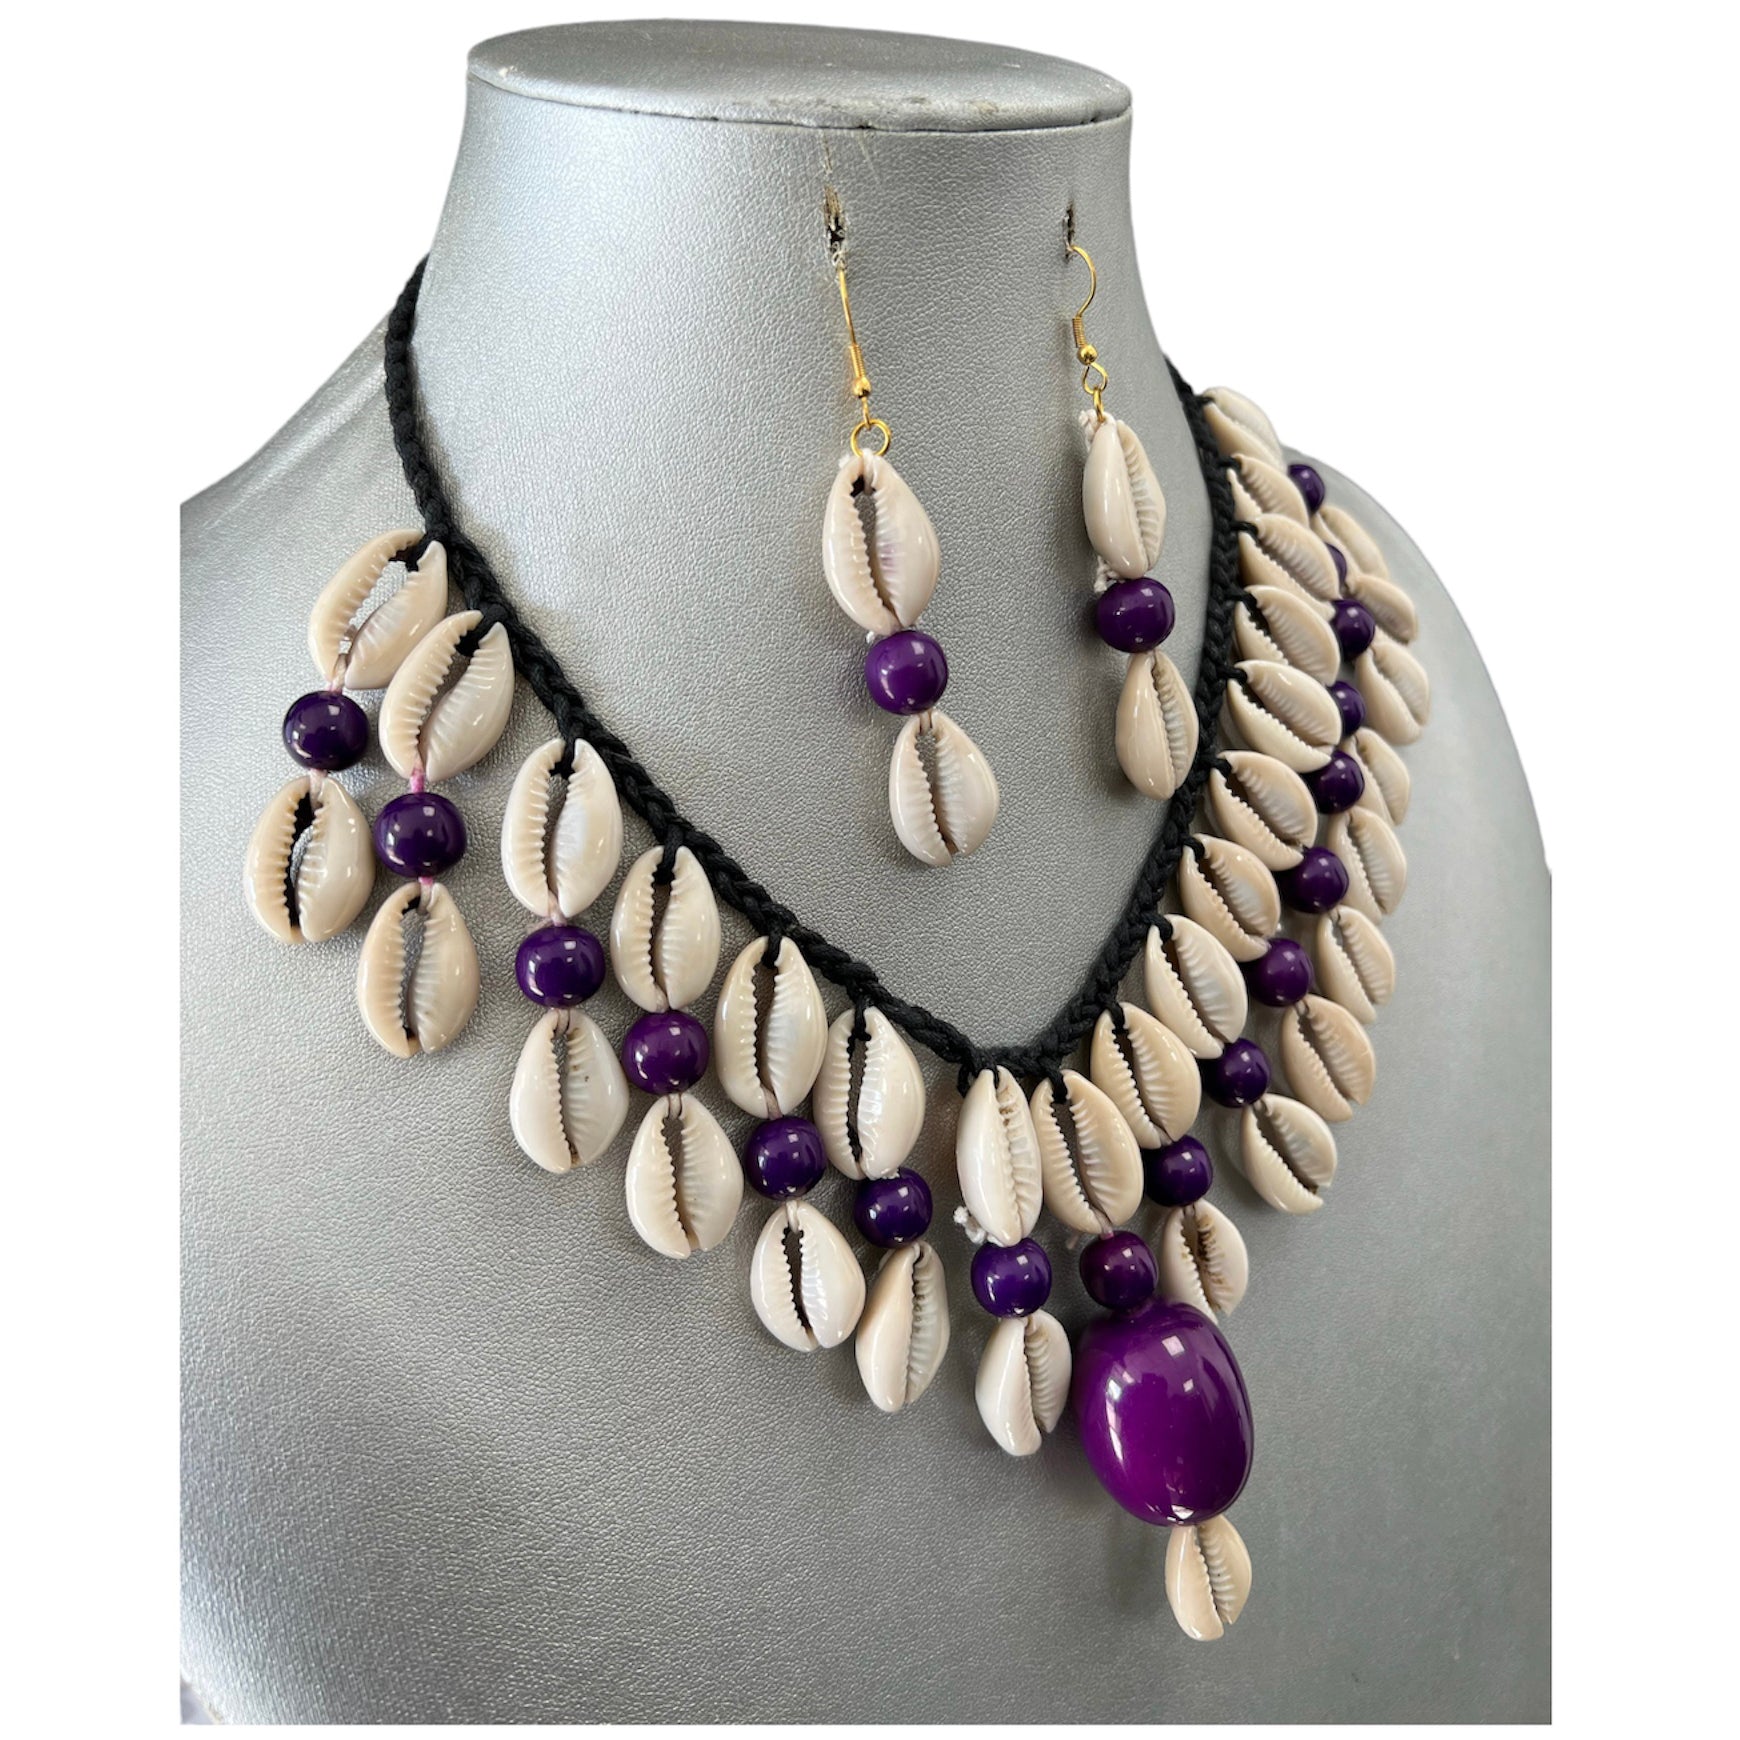 Women's 2 Layer Cowrie Shell Necklace Set With Colored Stone